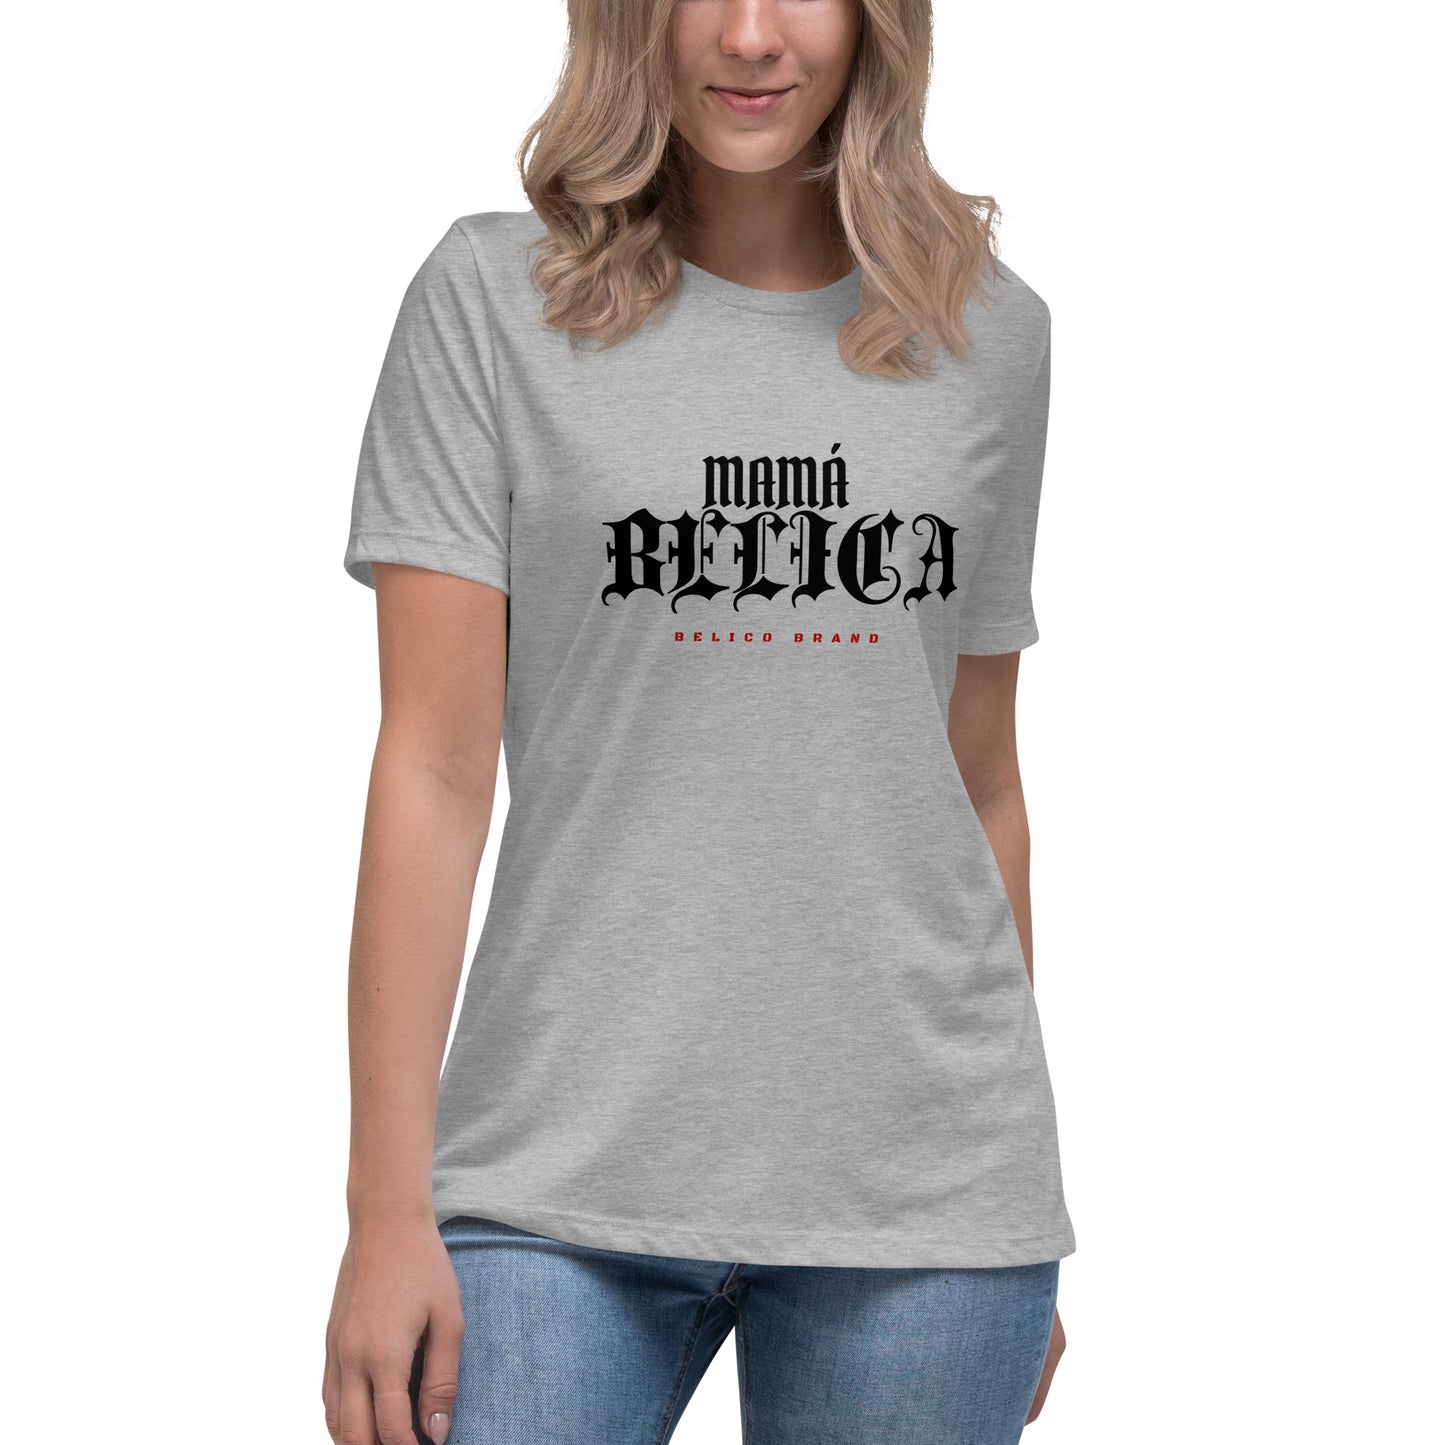 Mama Belica Relaxed T-Shirt